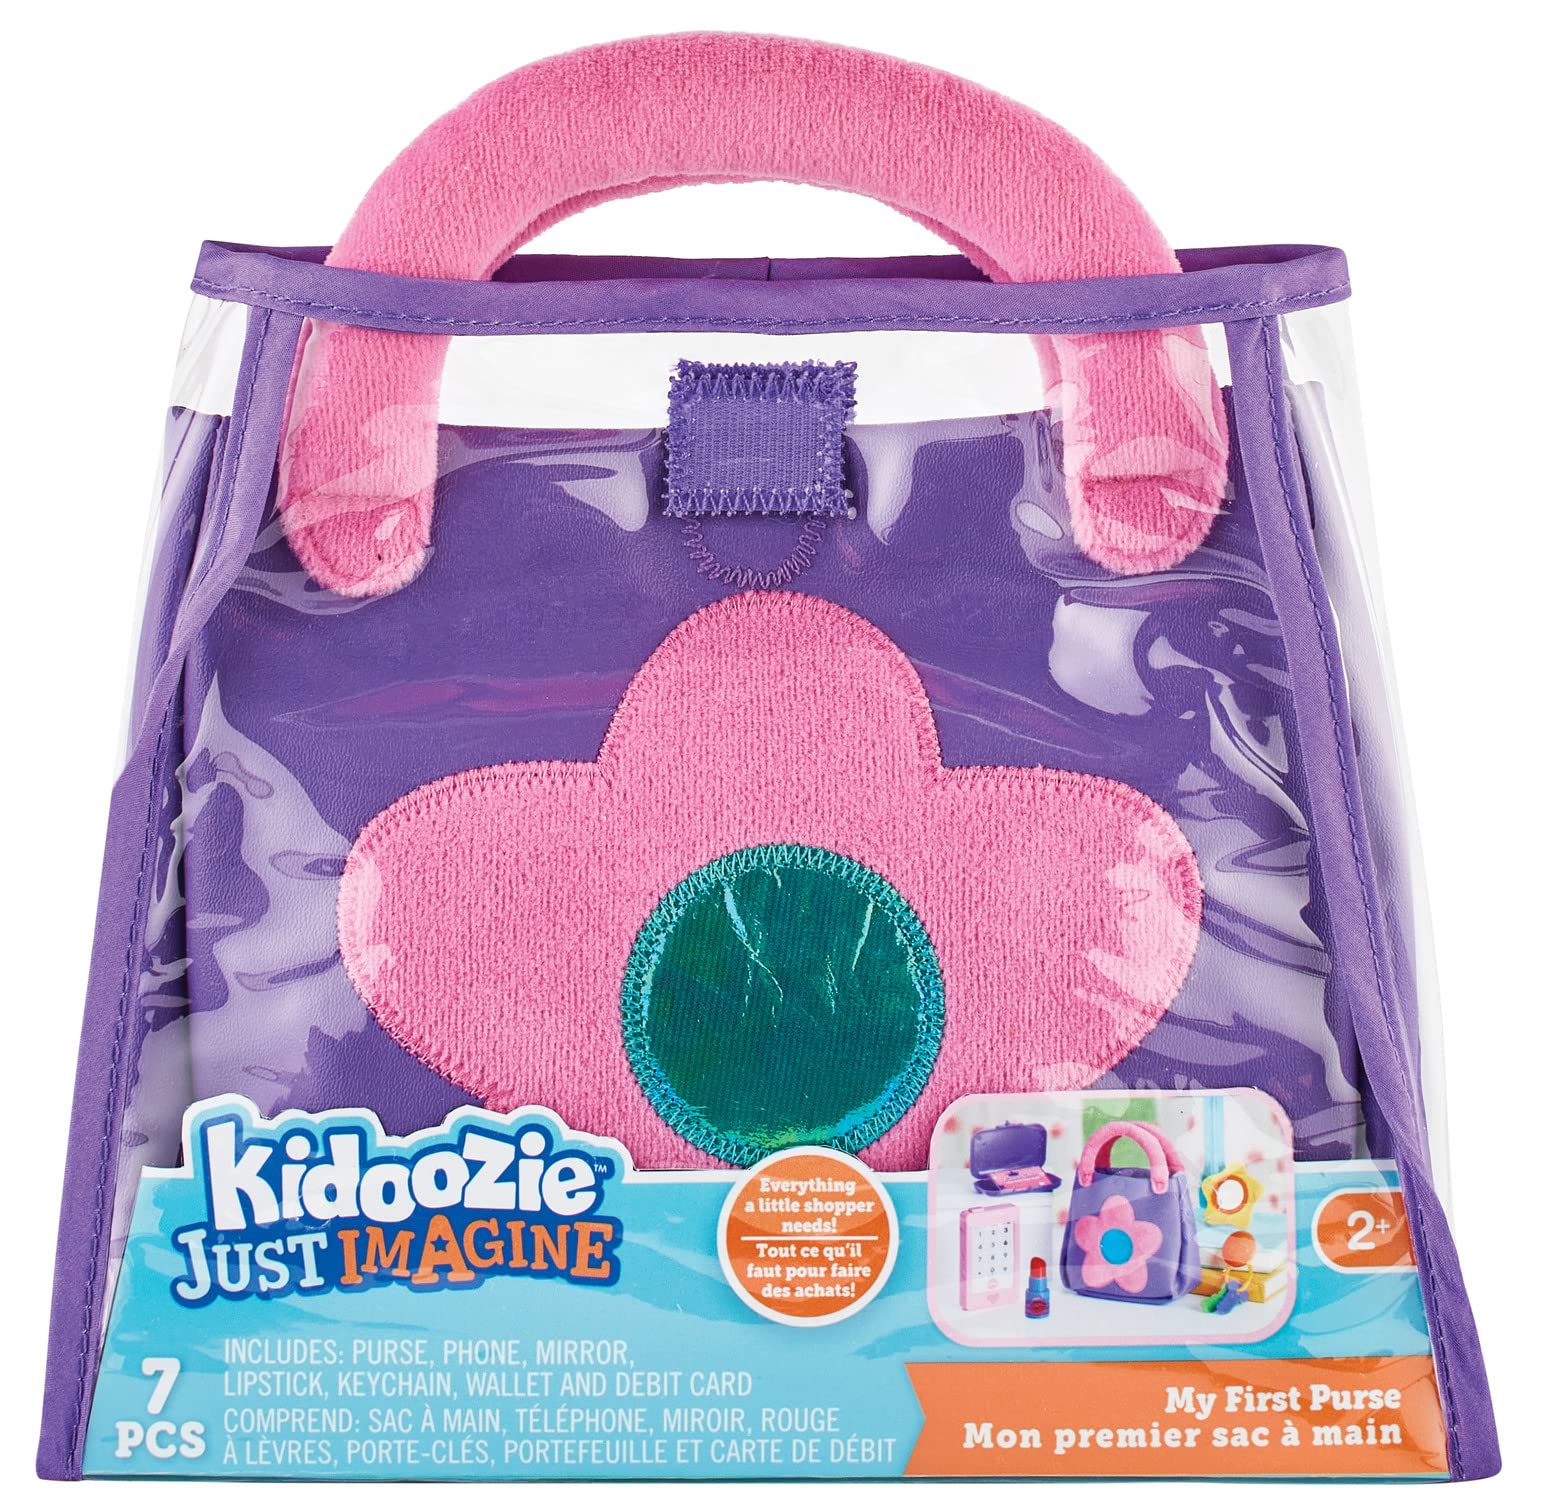 Kidoozie My First Purse - Pretend Play Purse with Wallet, Credit Card, Lipstick, Mirror, and More for Ages 2+. Kids Will Love Pretending to be Grown-ups!